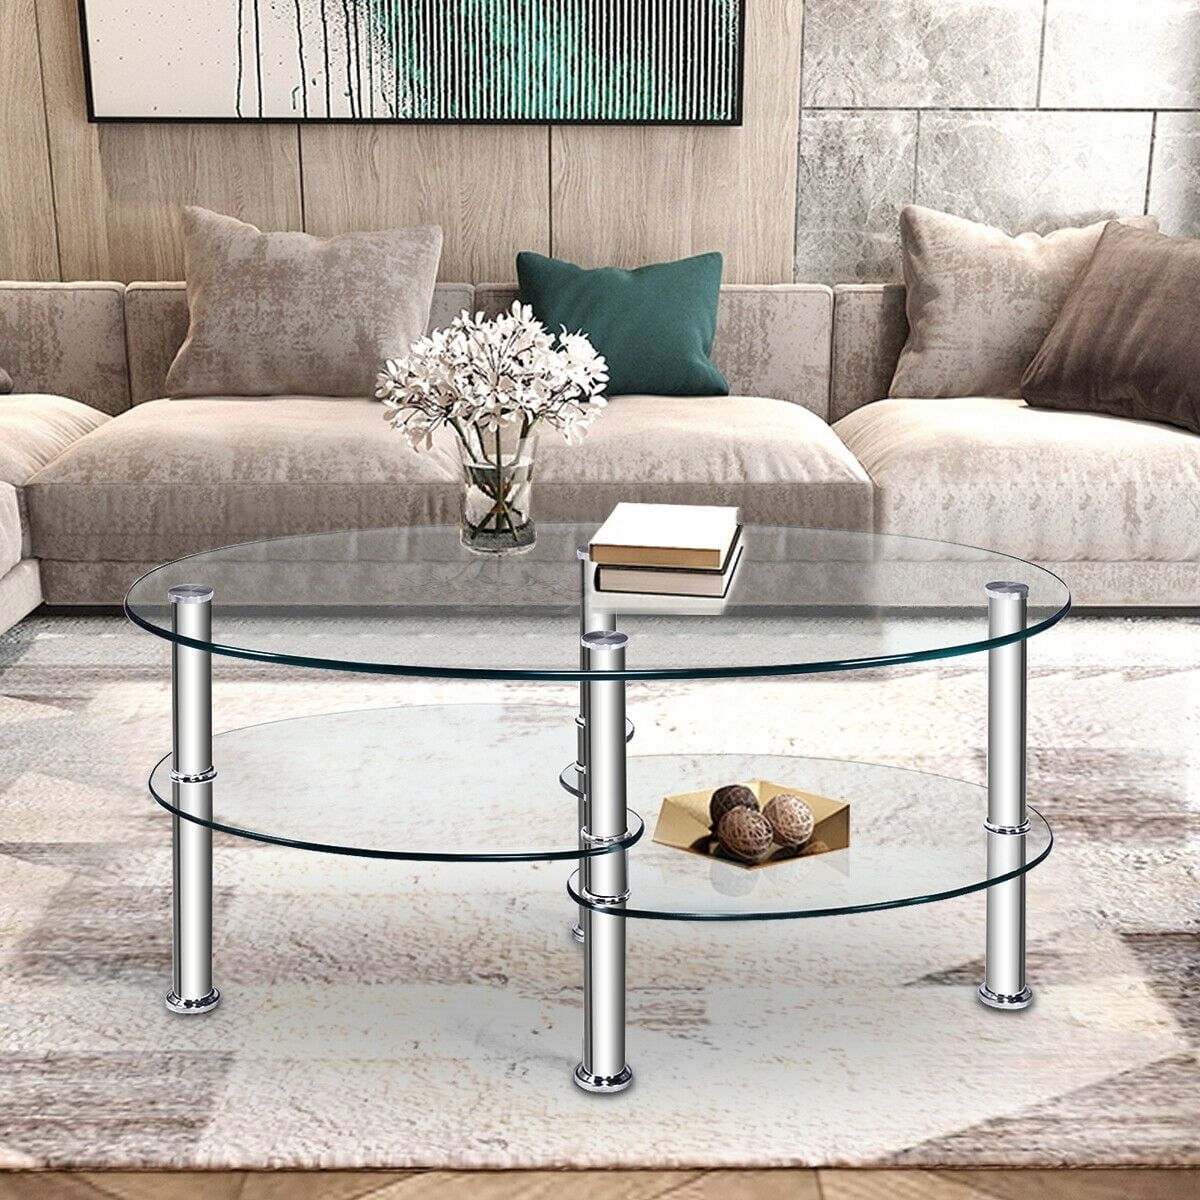 Costway Tempered Glass Oval Side Coffee Table Shelf Chrome Base Living Intended For Tempered Glass Coffee Tables (View 4 of 15)